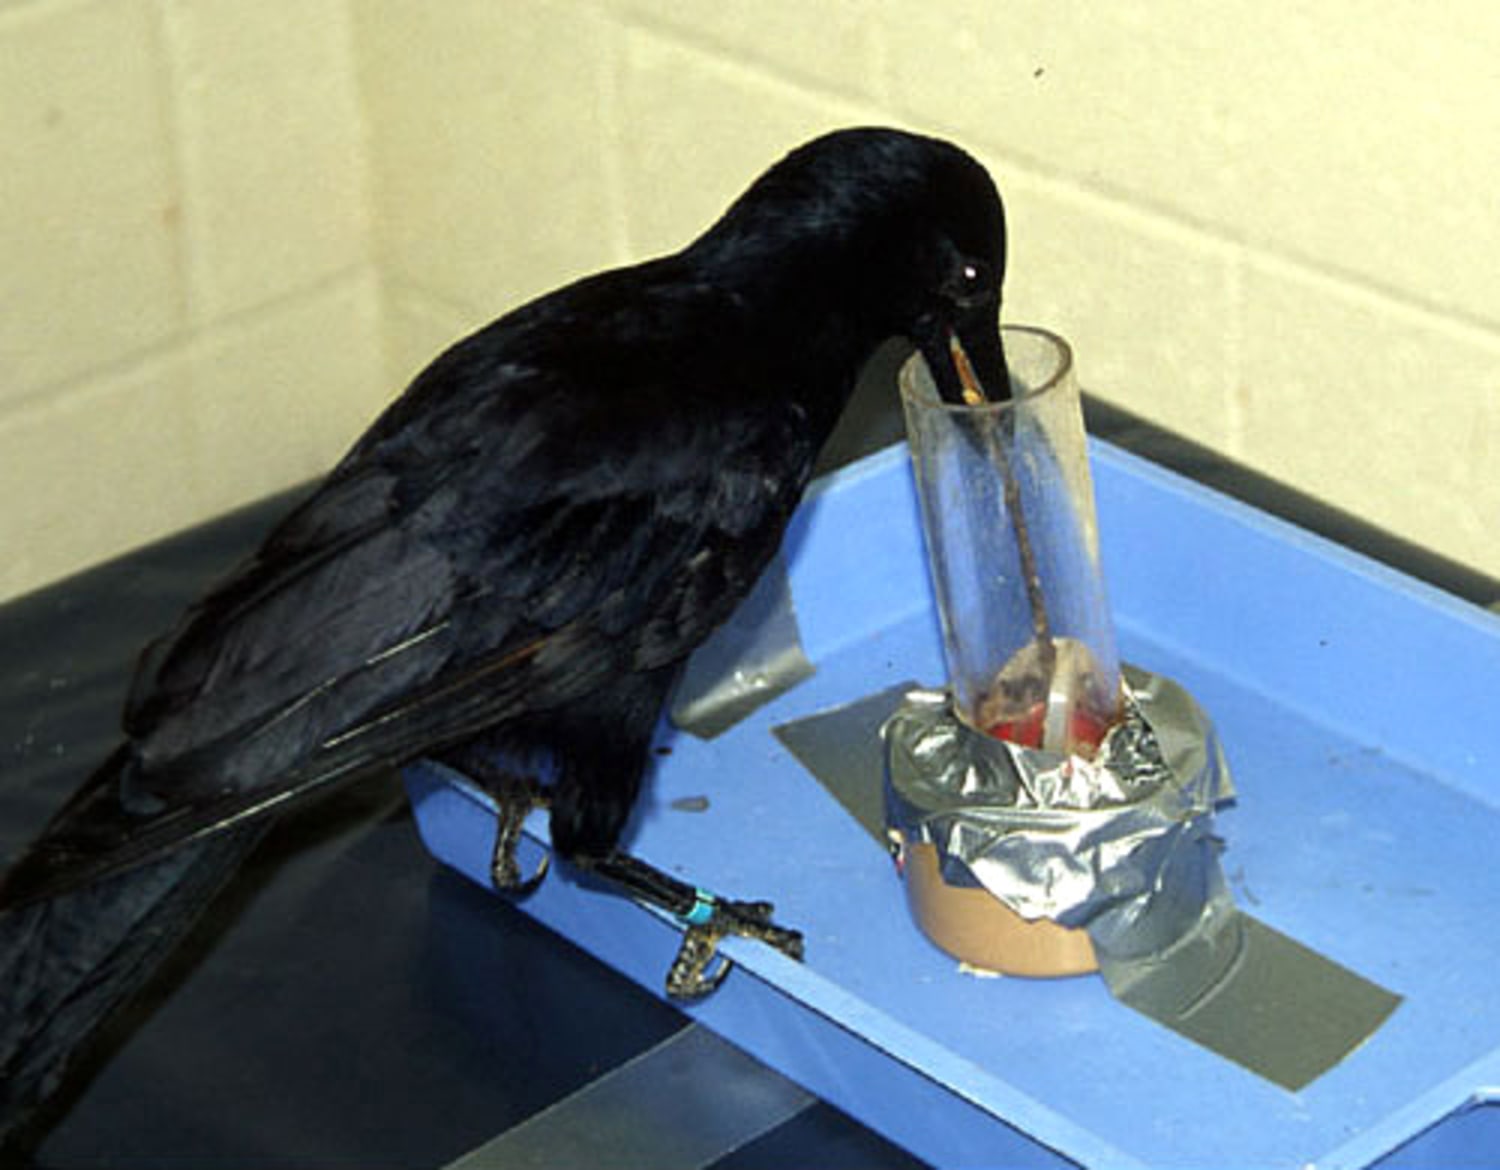 Crows share tricks of the trade